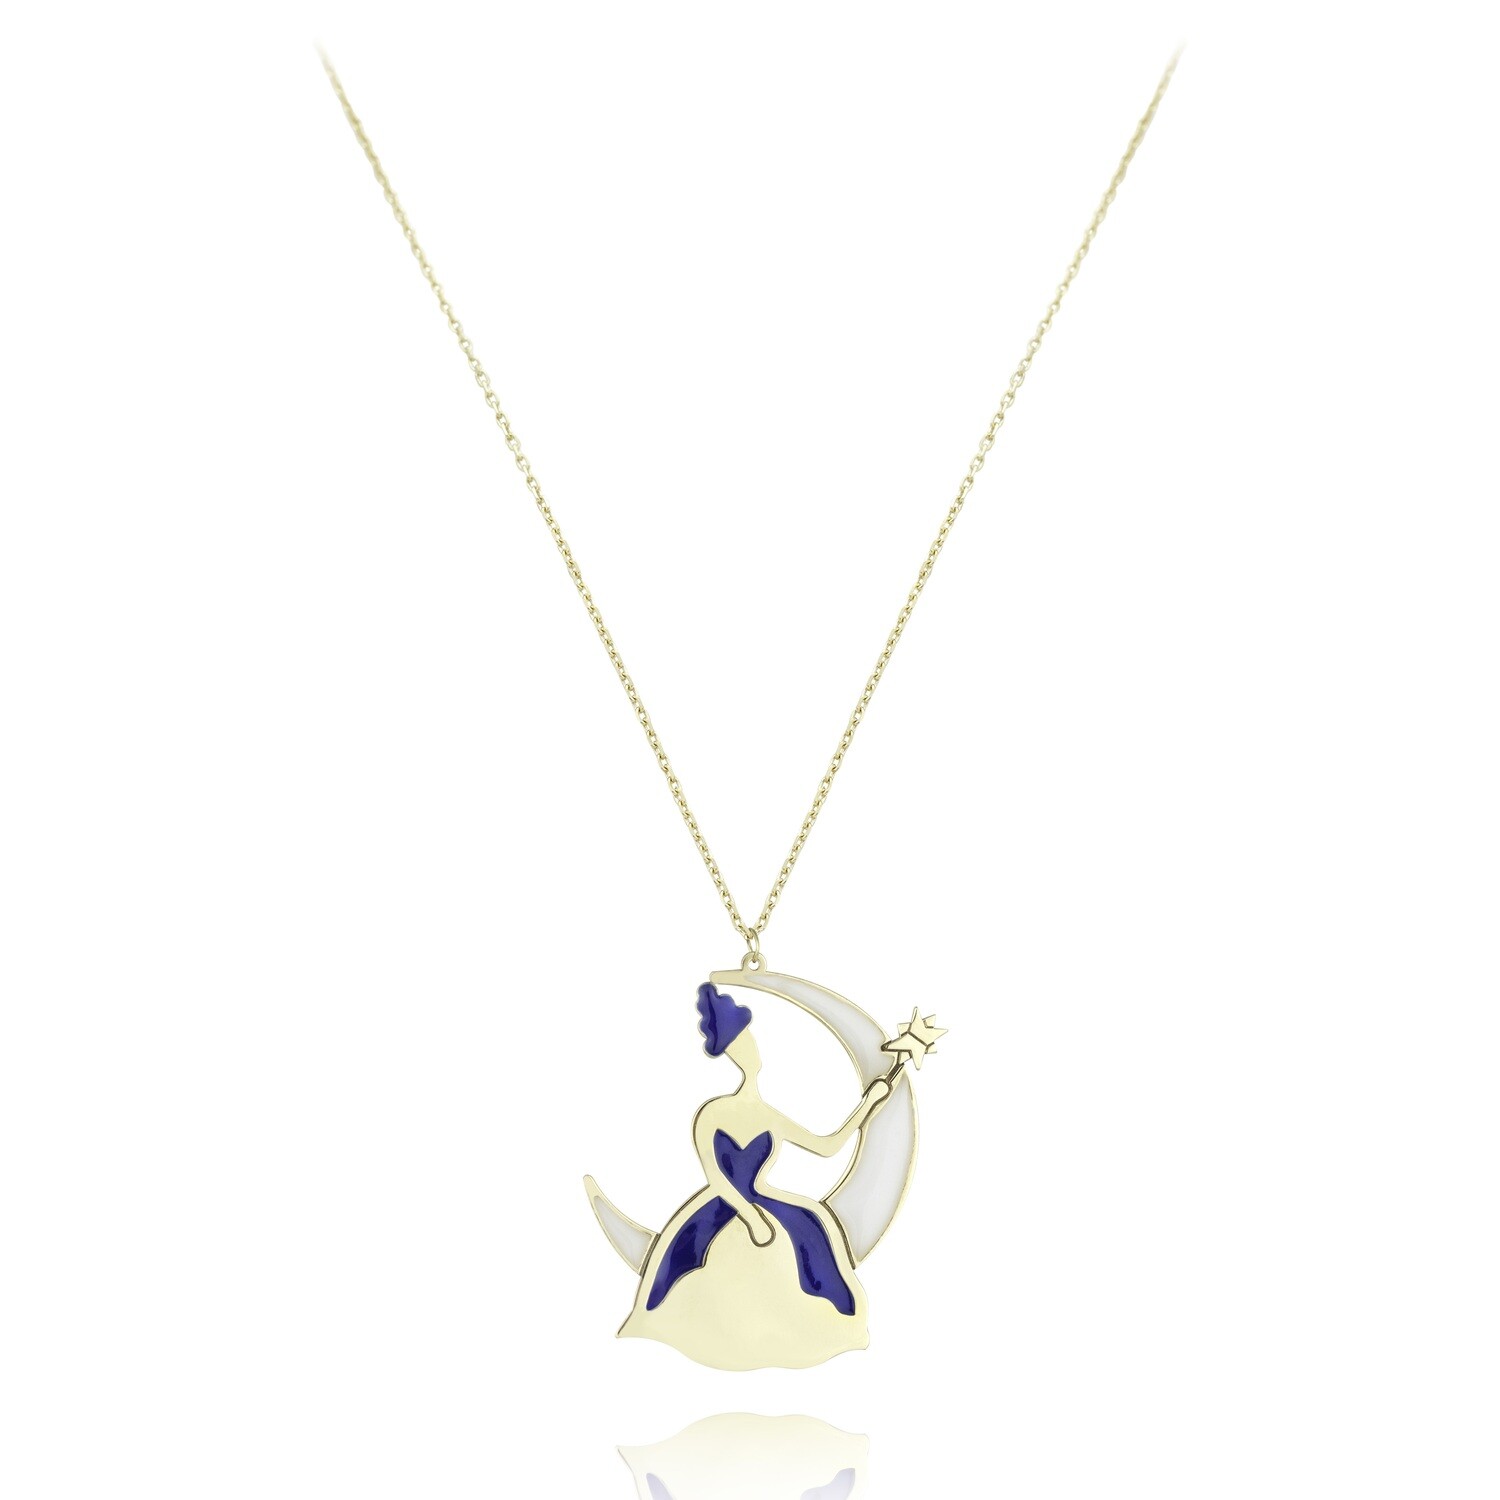 Fairy Tale Gold Necklace with Enamel